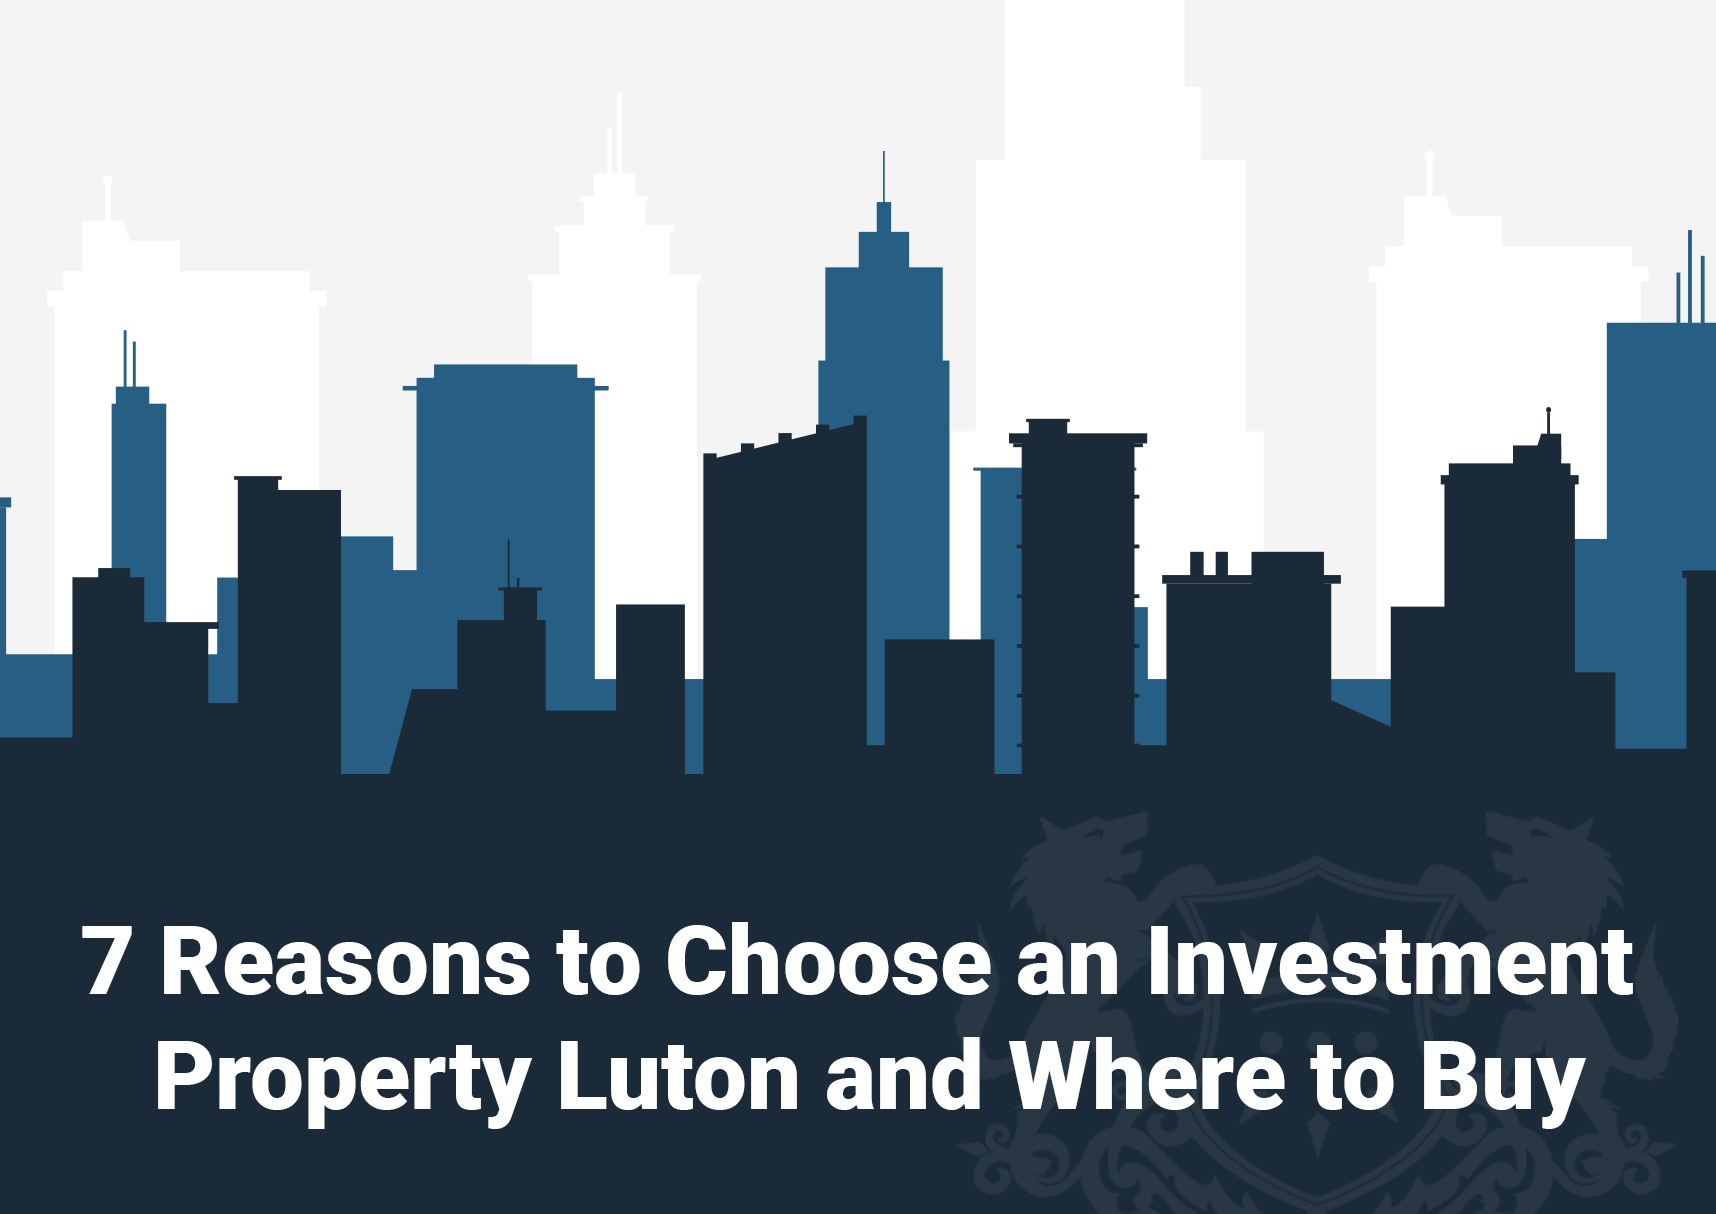 7 Reasons to Invest in Property in Luton and Where to Buy